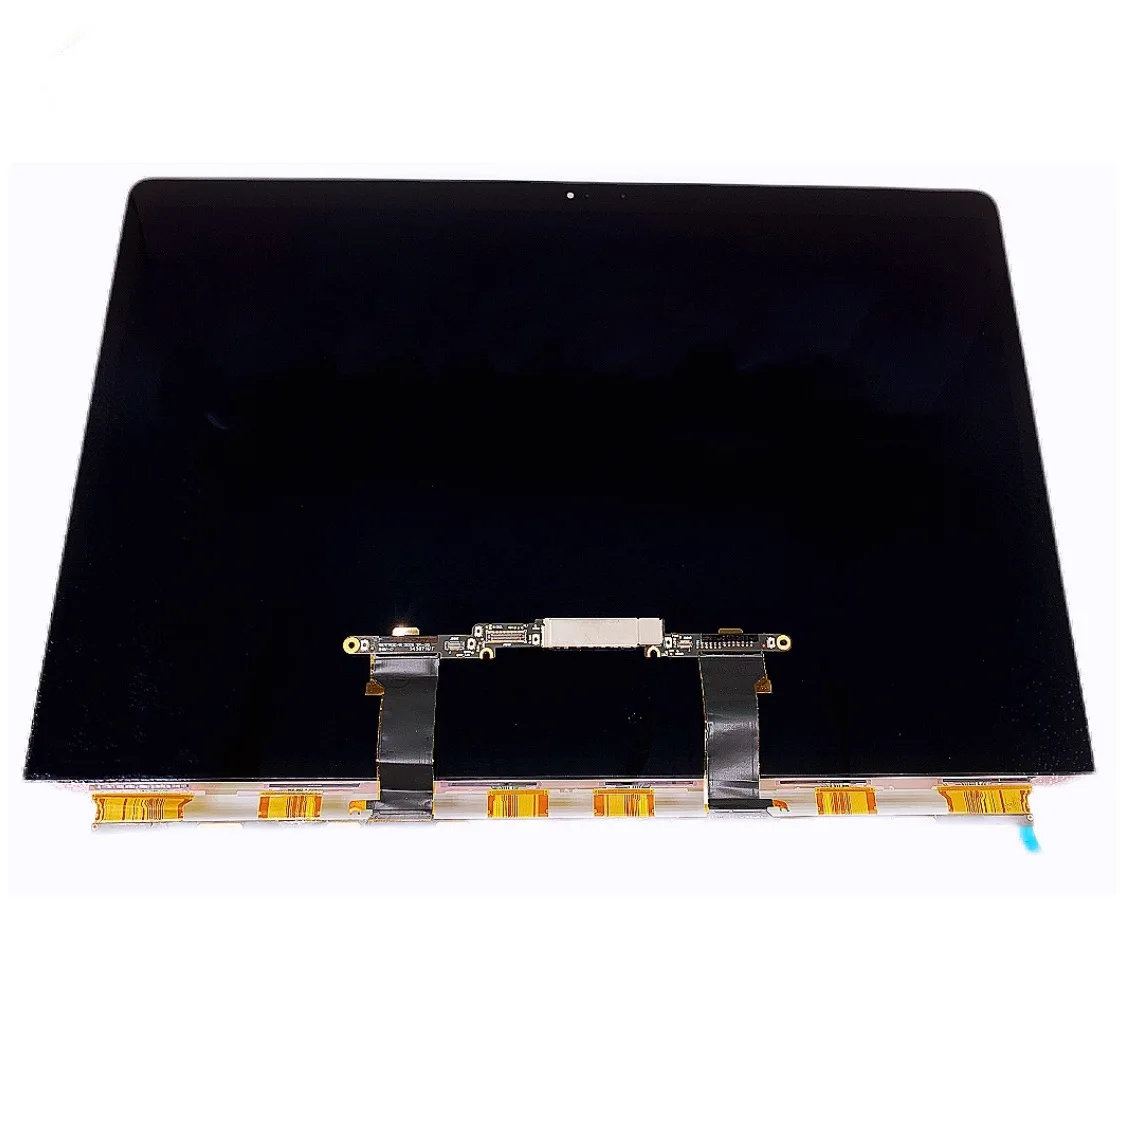 

New Mid 2018 Year A1989 LCD Display Screen Panel for Macbook Pro Retina 13.3" A1989 LCD LED Screen Glass EMC 3214 MR9Q2